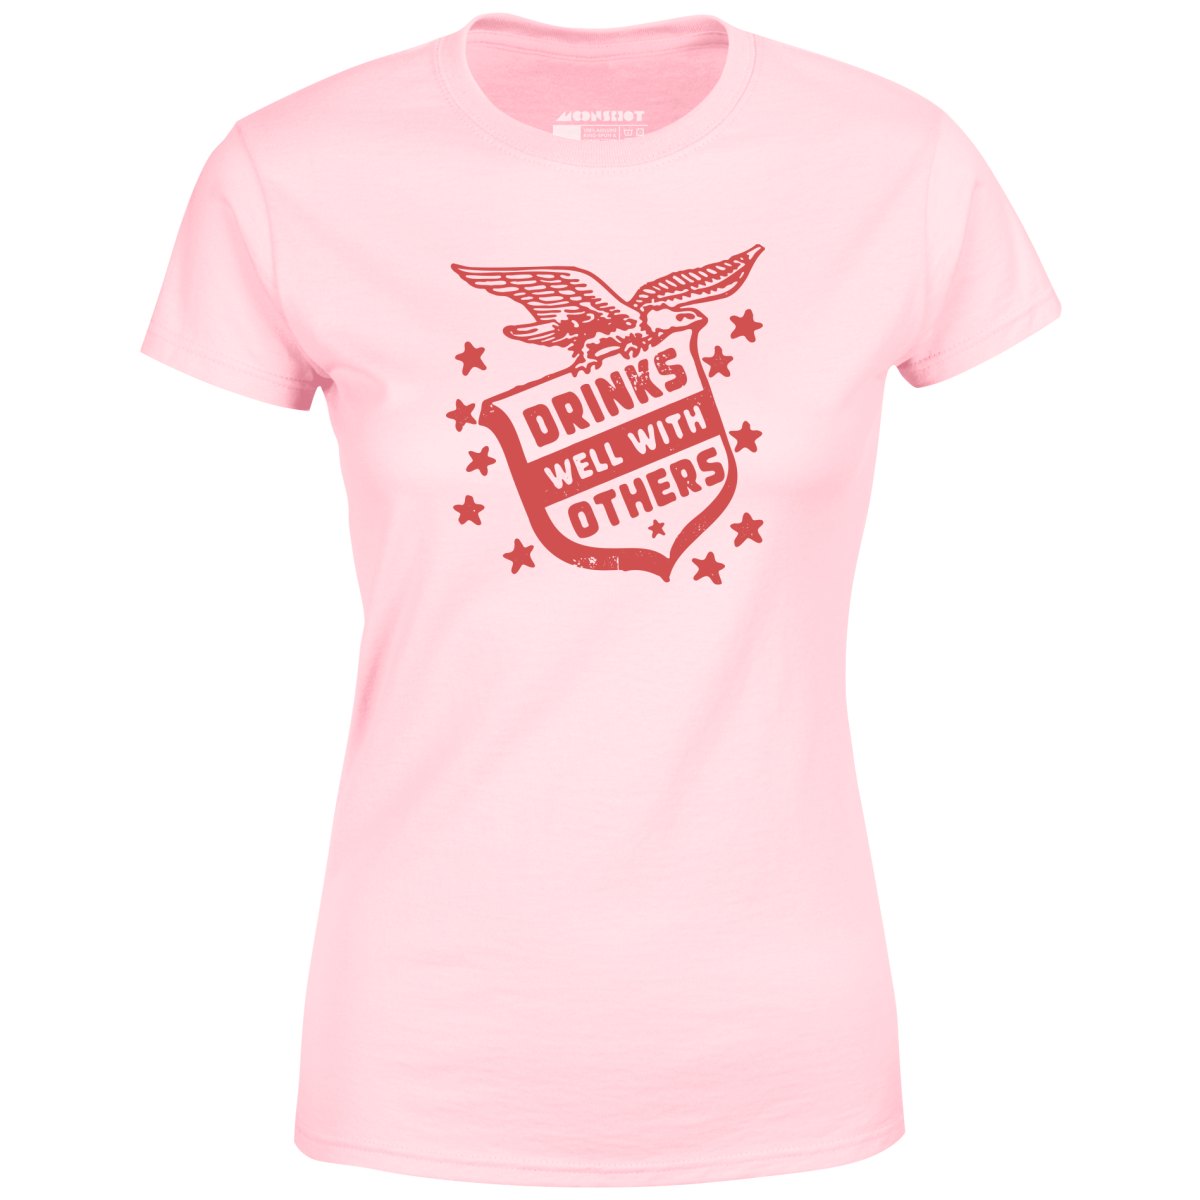 Drinks Well With Others - Women's T-Shirt